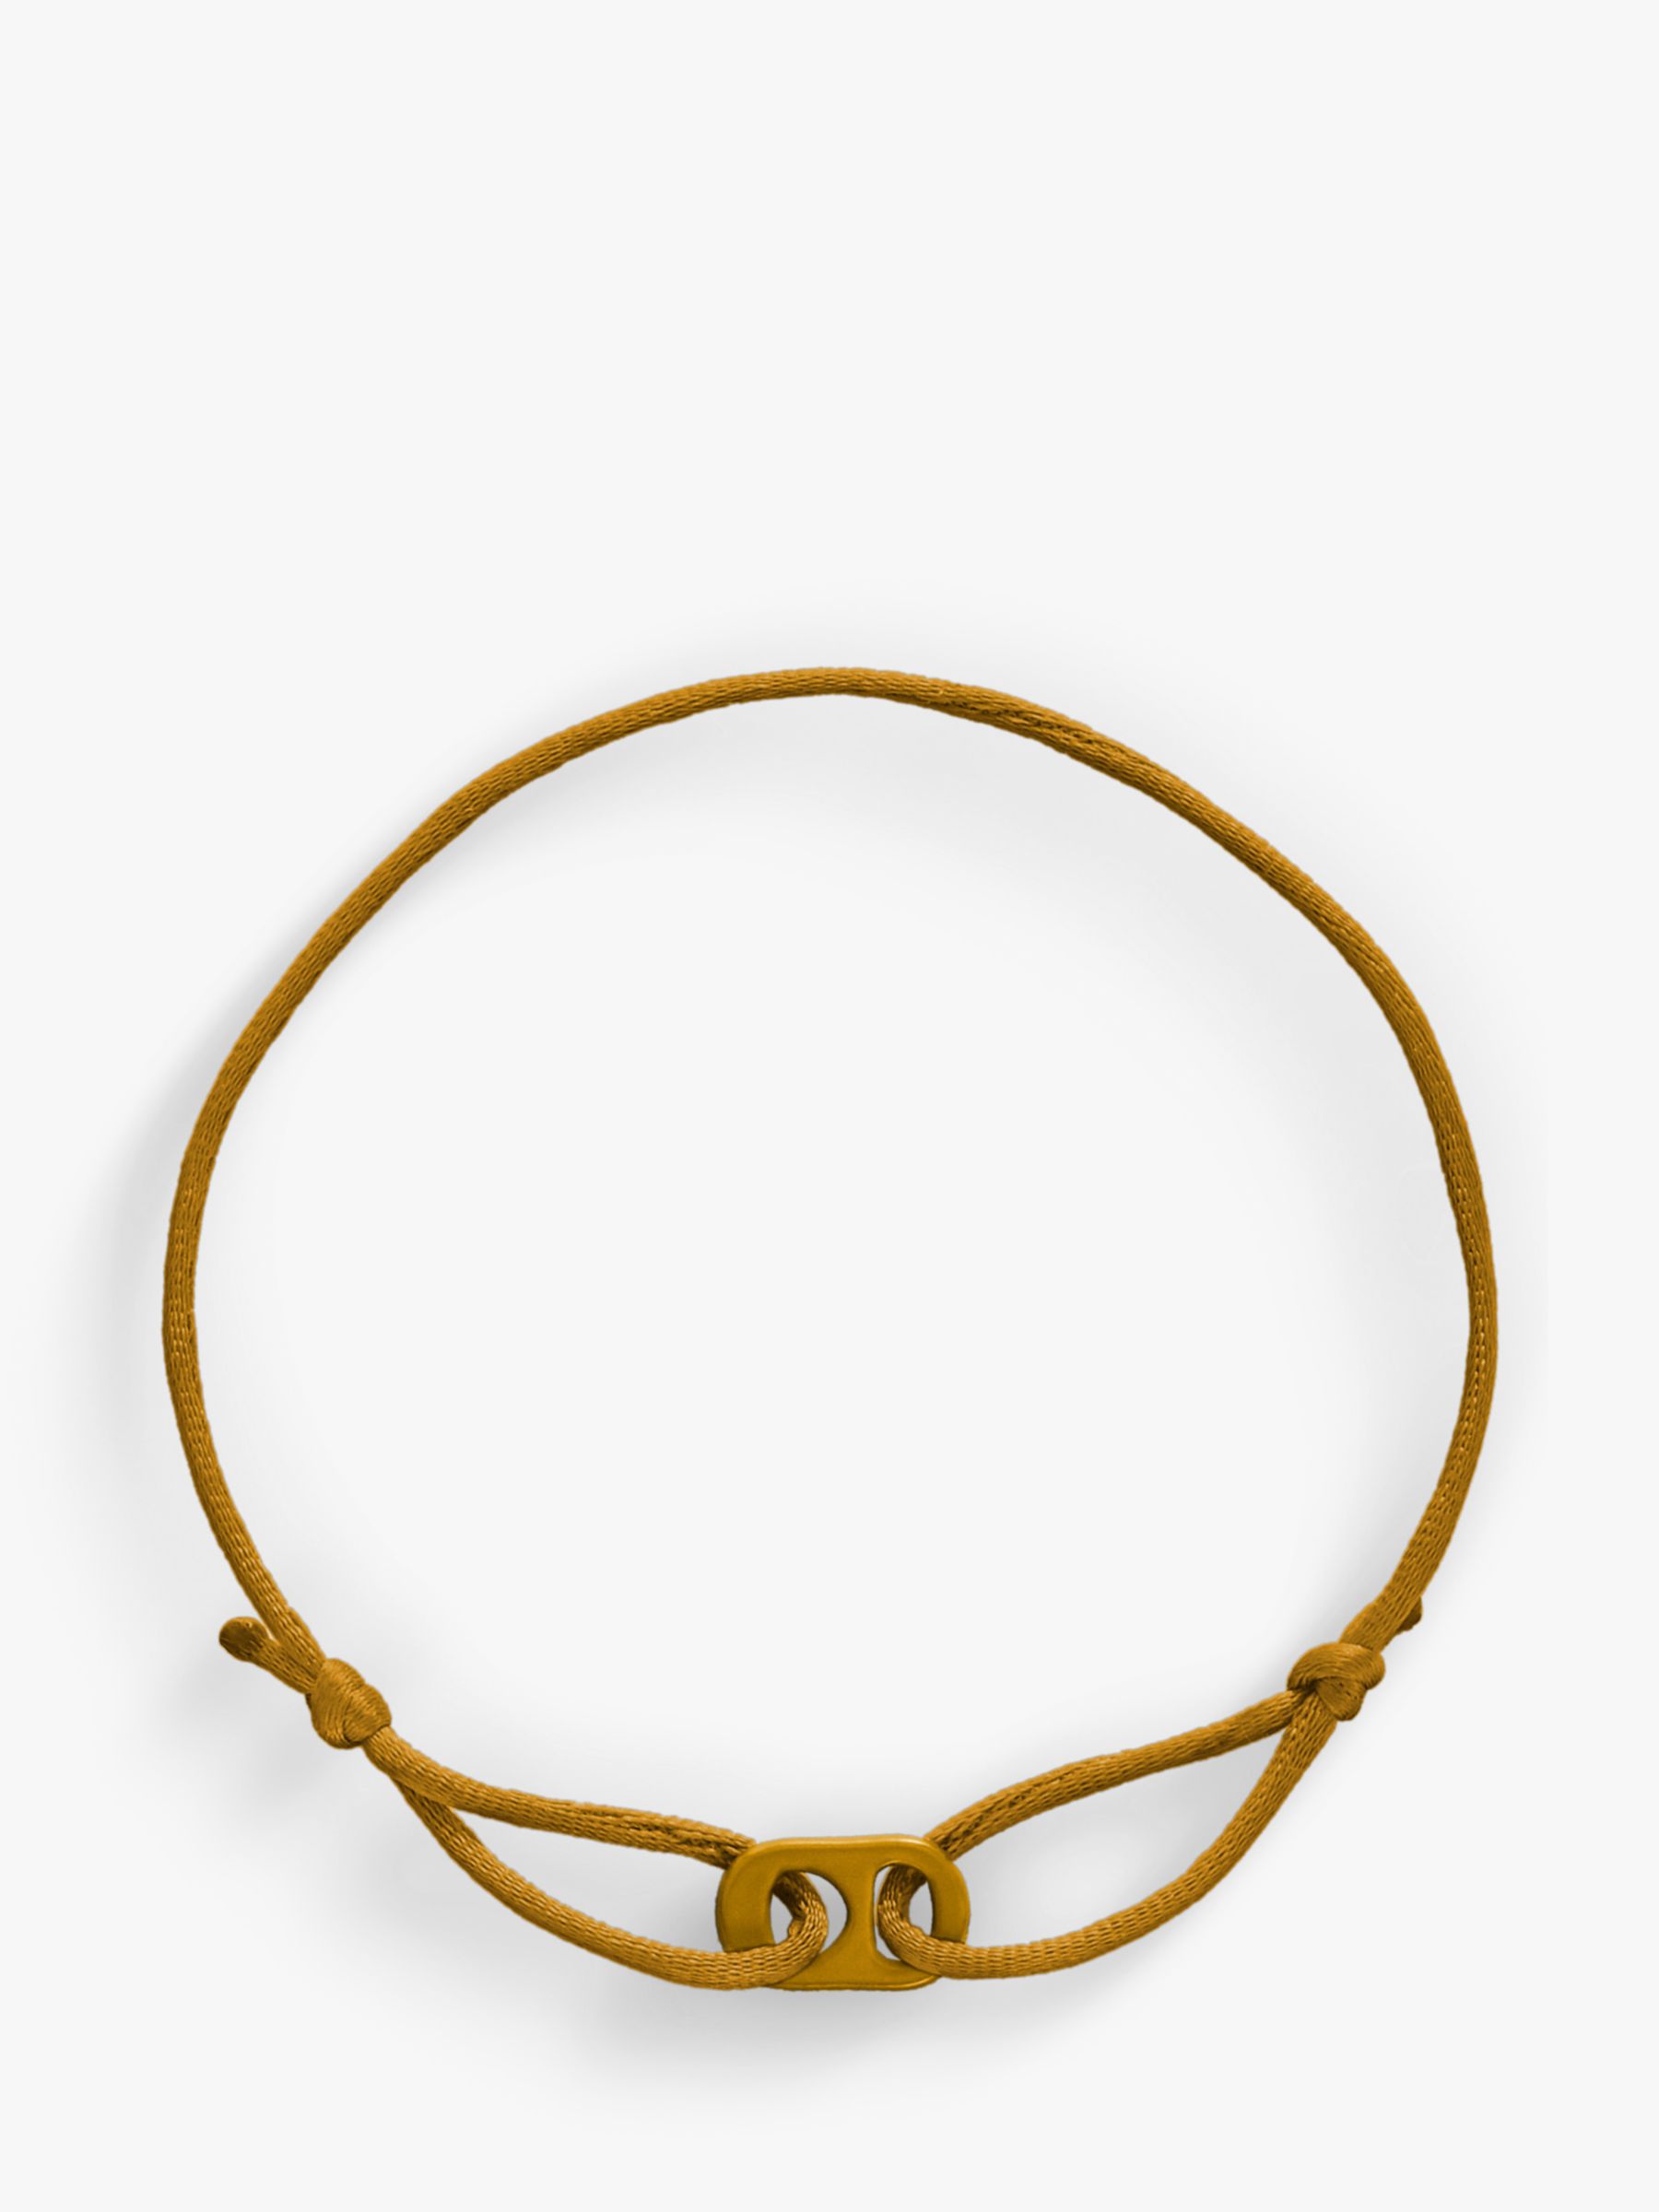 Buy #TOGETHERBAND UN Goal 12 - Responsible Consumption and Production Recycled Plastic Mini Bracelet, Pack of 2, Dark Mustard Online at johnlewis.com